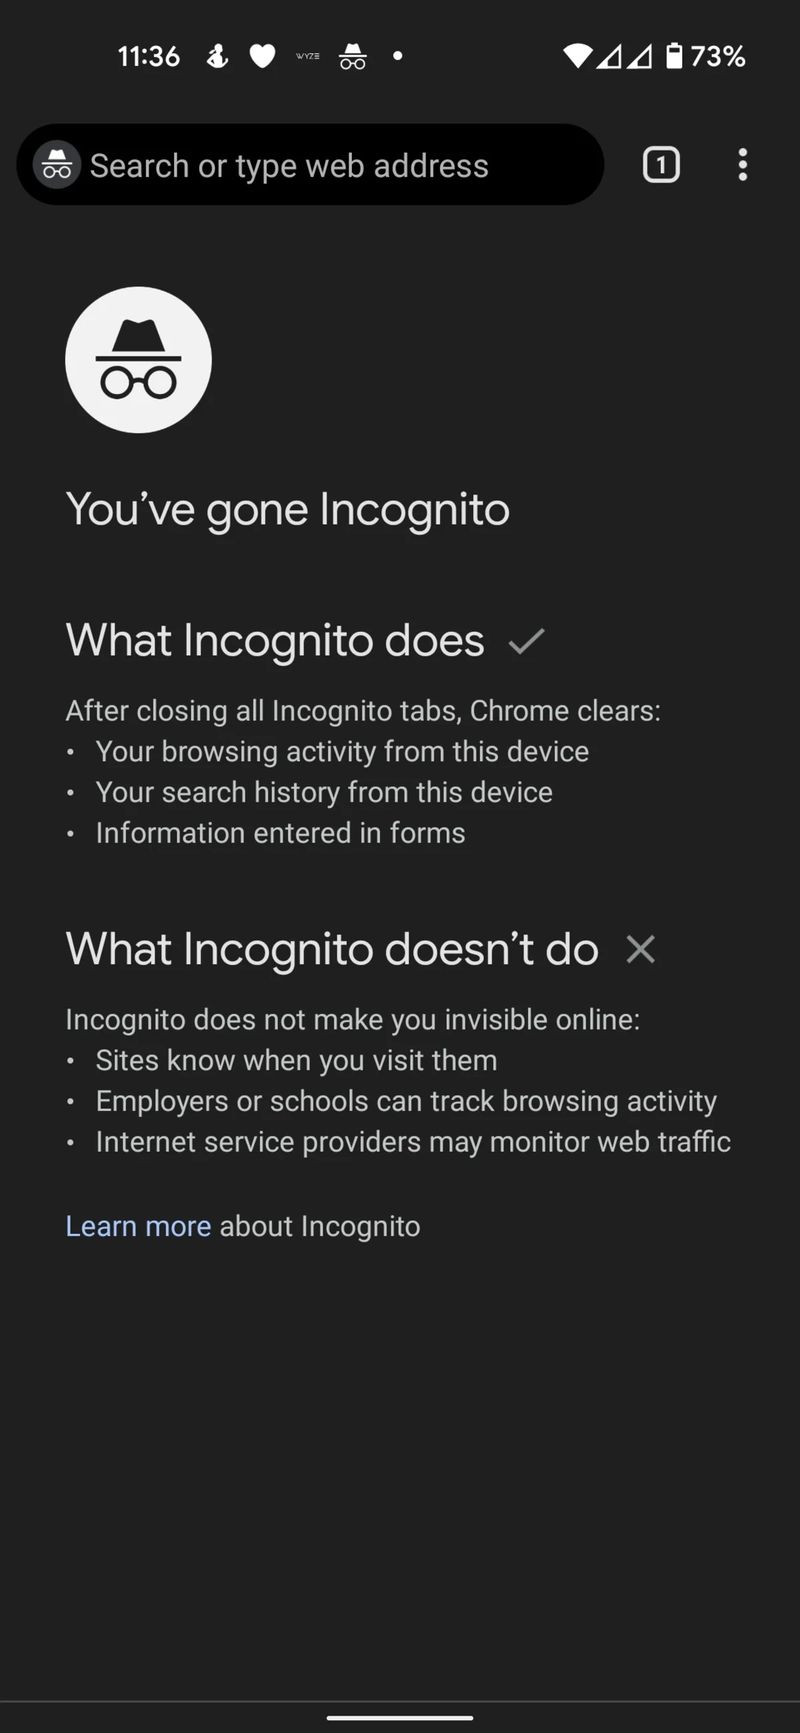 Google Chrome changes its incognito mode on Android due to $5 billion lawsuit